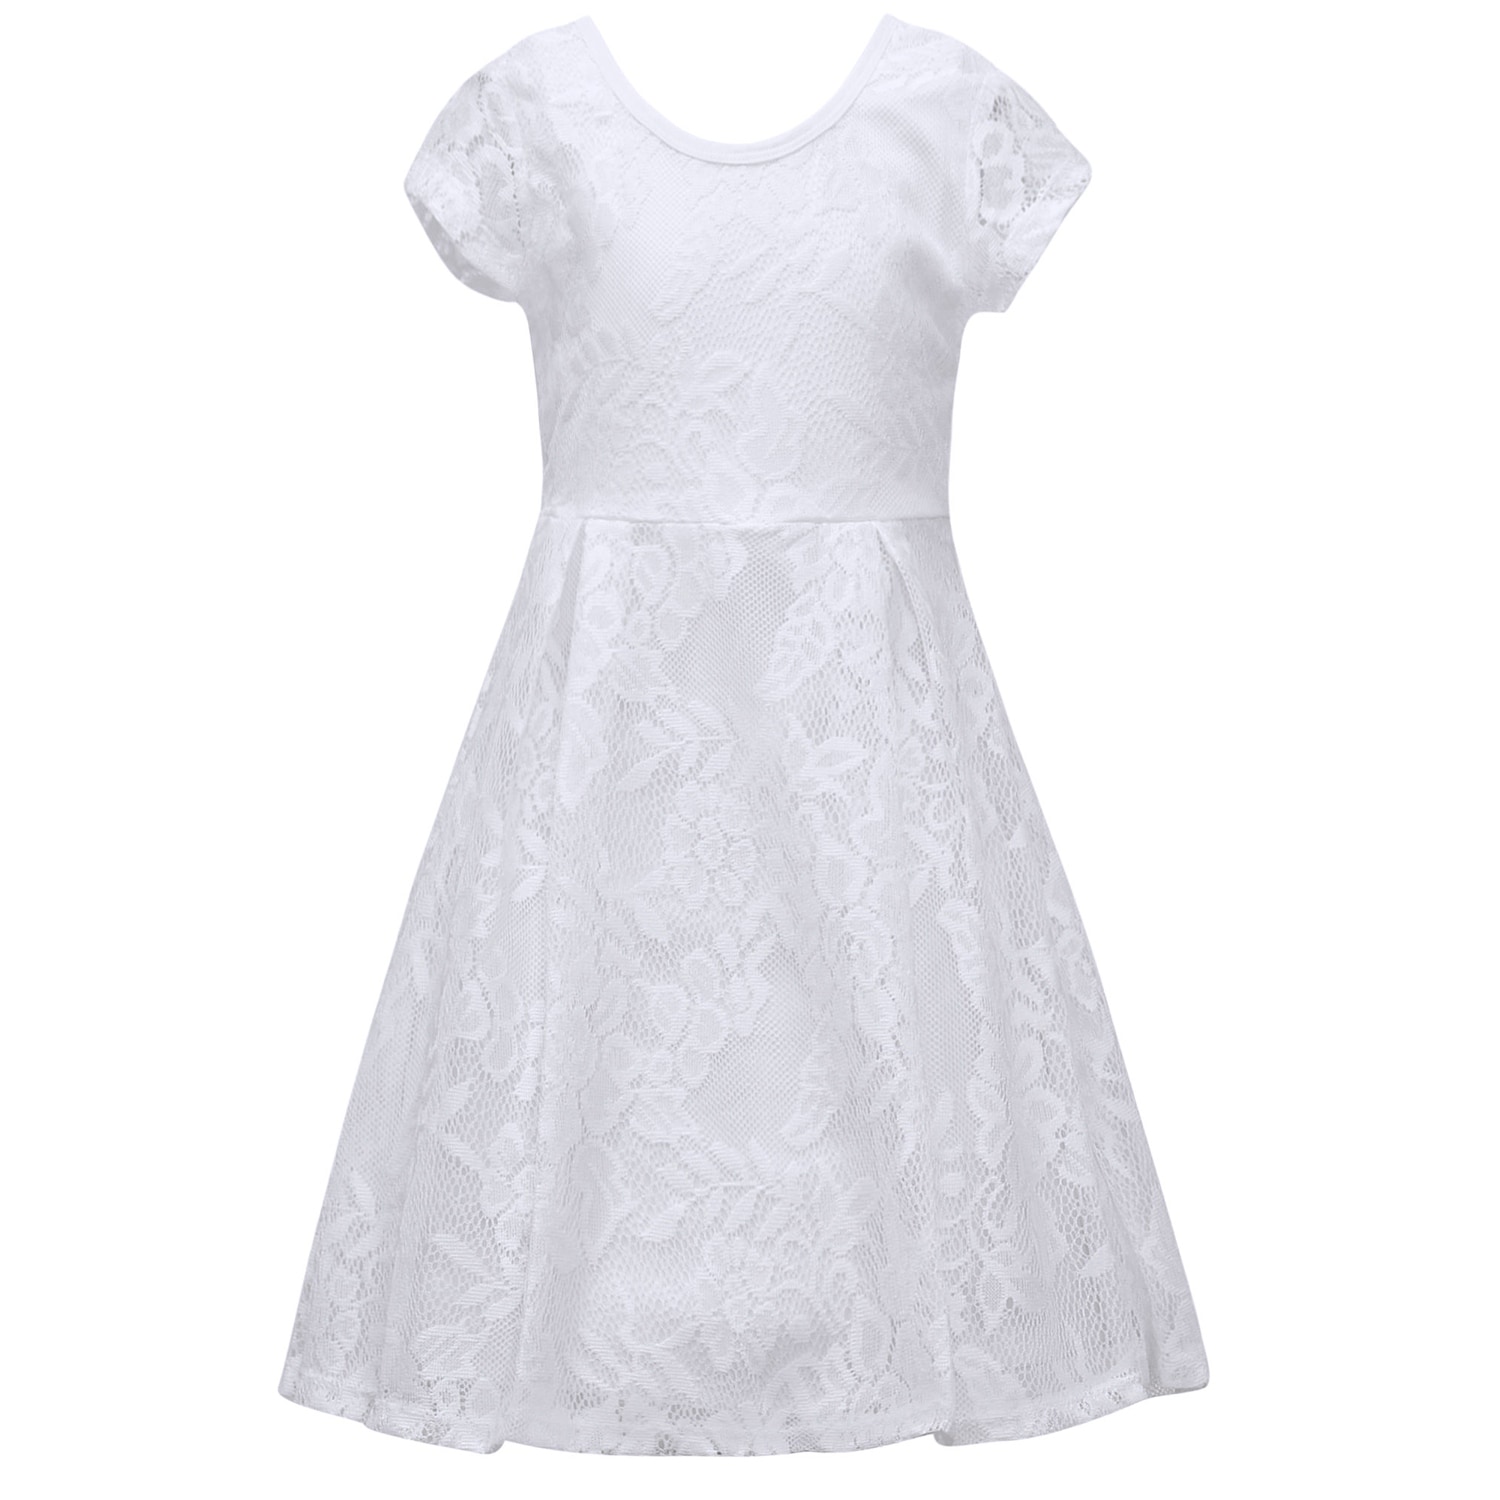 white lace spring dress